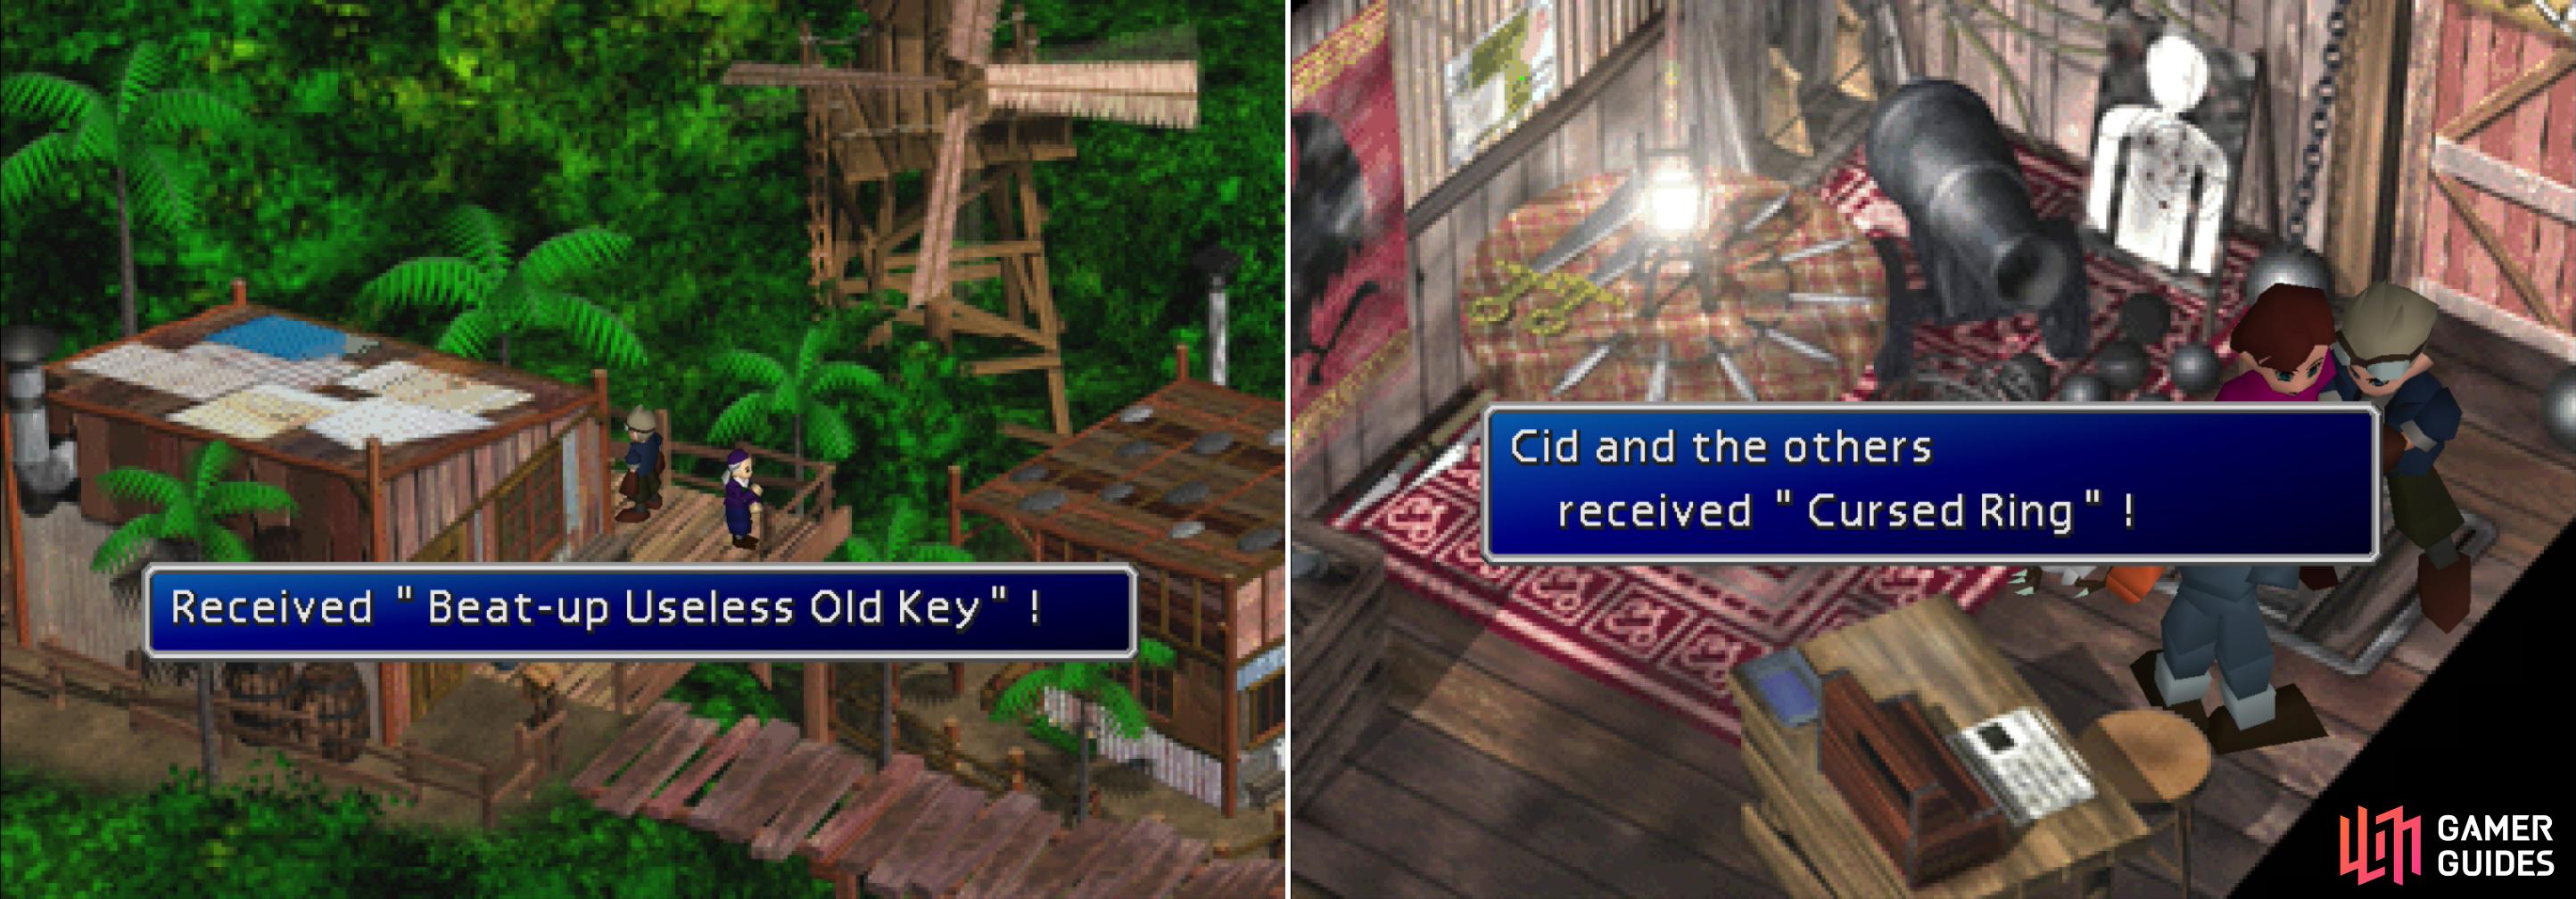 Find the "Beat-up Useless Old Key" near the accessory shop (left) then try to open the "locked" door in the weapon shop to get the Cursed Ring (right).